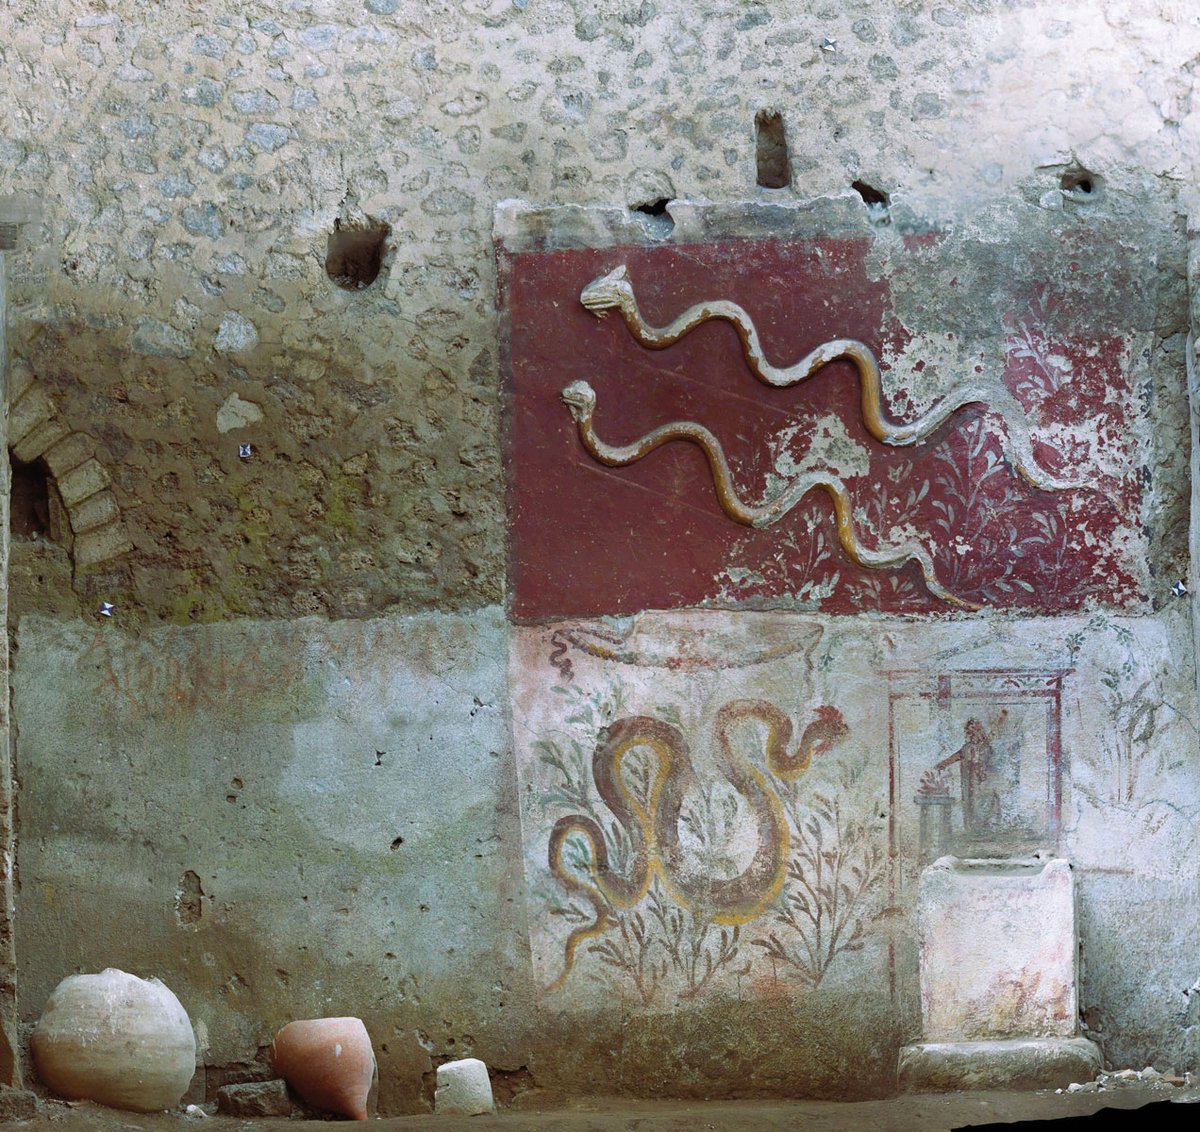 Ongoing excavations in Pompeii’s Regio IX area have unearthed the home of Pompeiian political candidate Aulus Rustius Verus. It contained an interior lararium, or household altar, decorated with 2,000-year-old election propaganda and serpents.

archaeology.org/slideshow/1231…